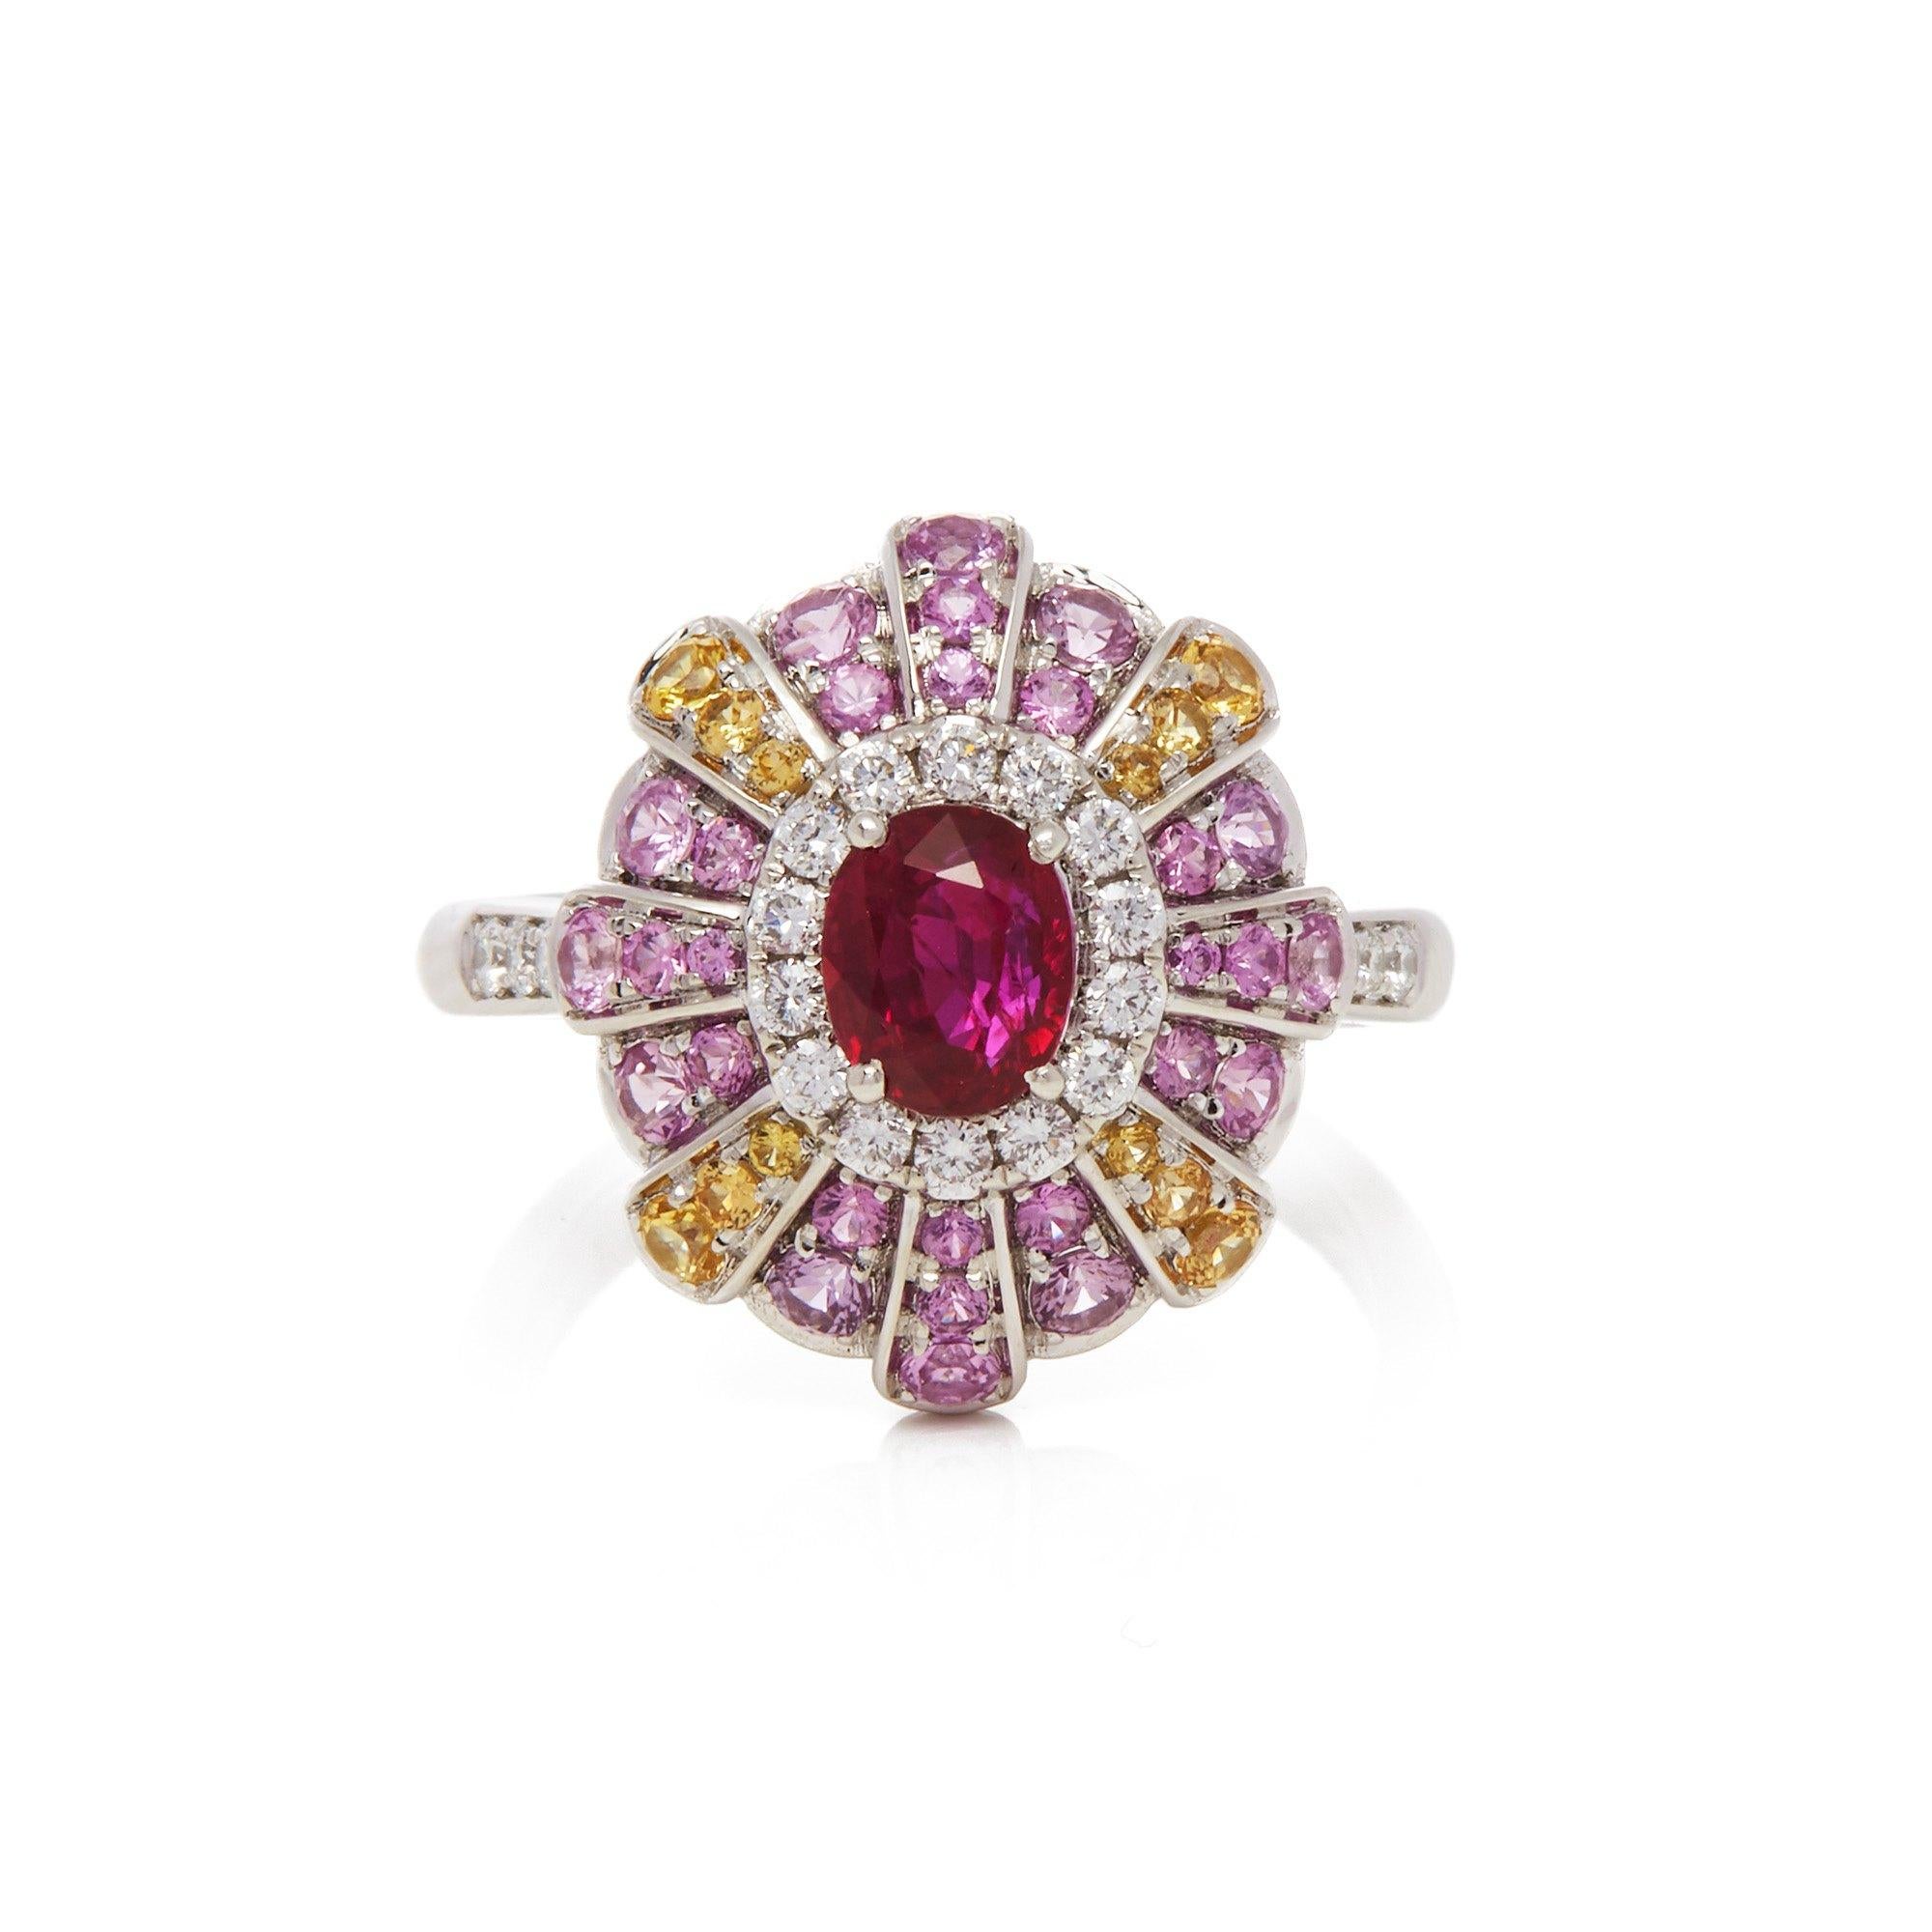 This ring designed by David Jerome is from his private collection and features one oval cut Ruby sourced in Mozambique. Set with a mix of round brilliant cut Diamonds, pink and yellow Sapphires totalling 1.71cts combined. Mounted in platinum. Ring